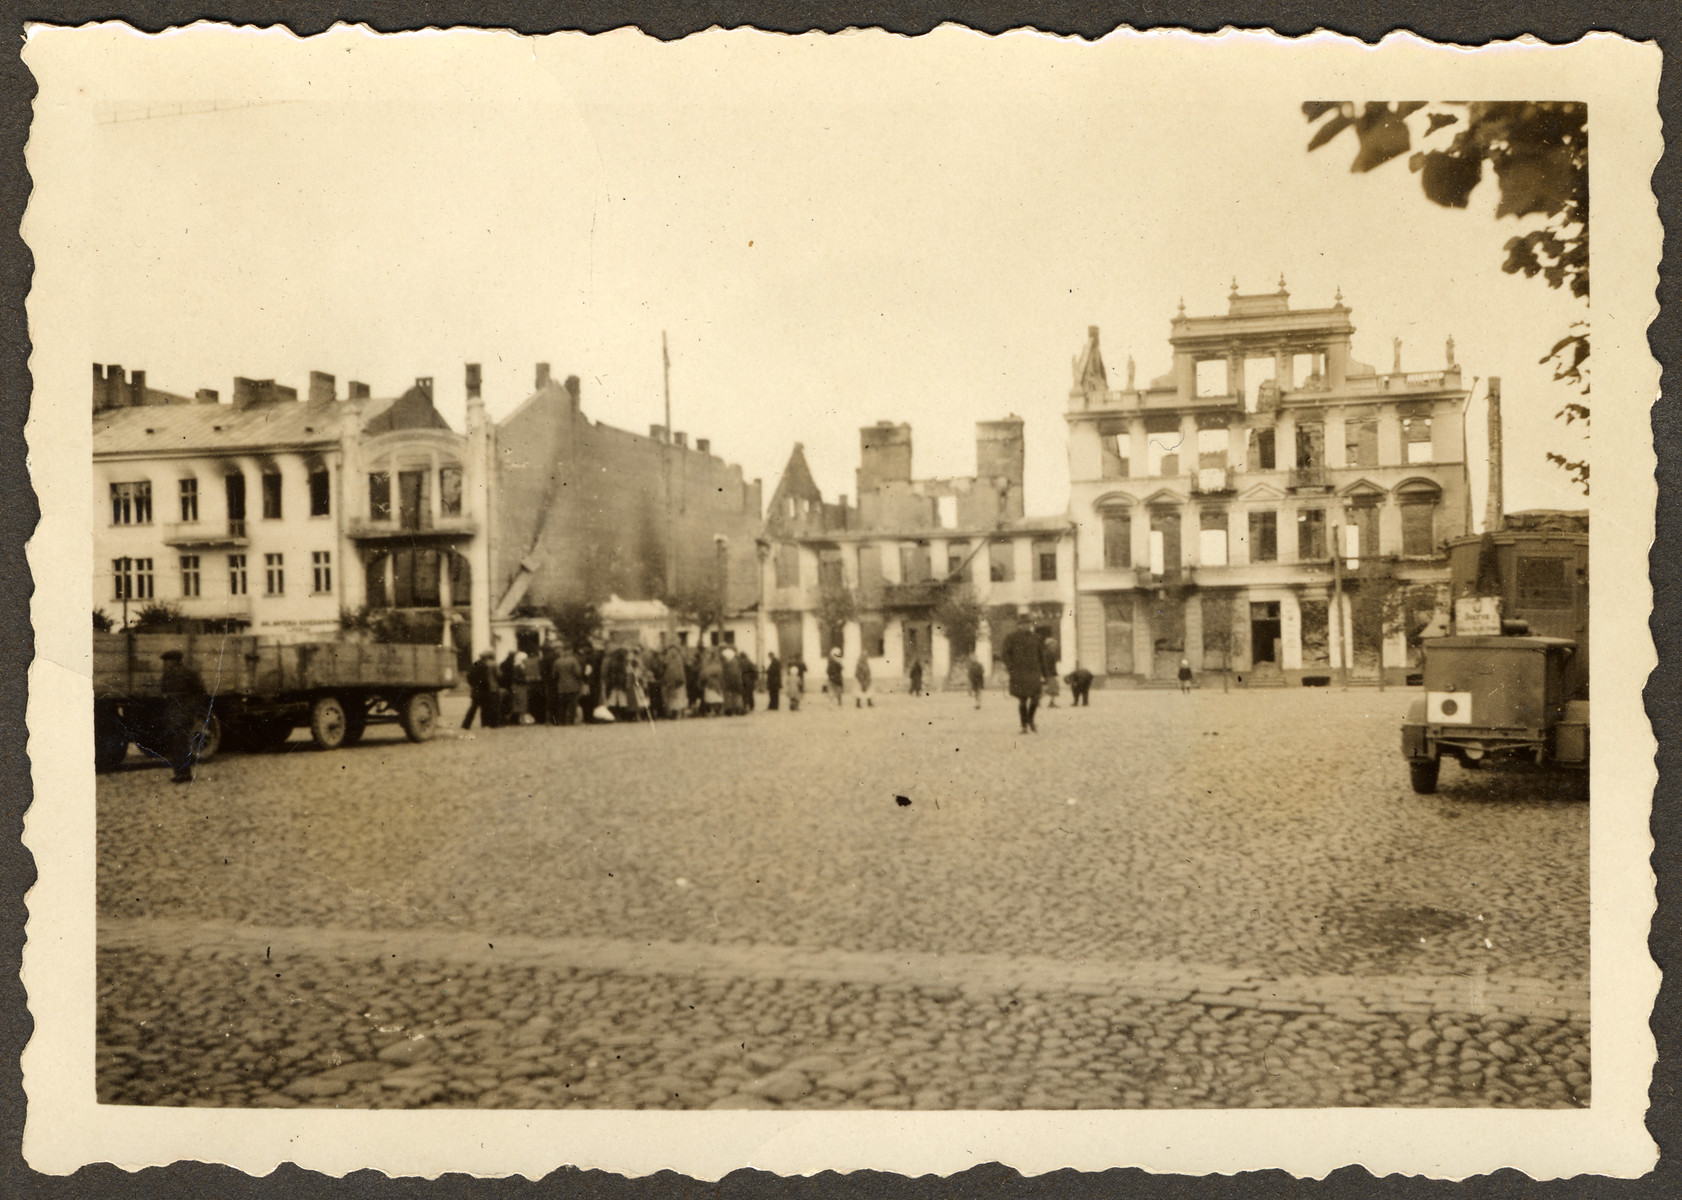 The ruins of the city square in Mlawa, near Warsaw, Poland. [There is a possible round-up going on in the center, near the large truck on the left hand side of the photo.]

Original German caption reads: "The city square of Mlawa."